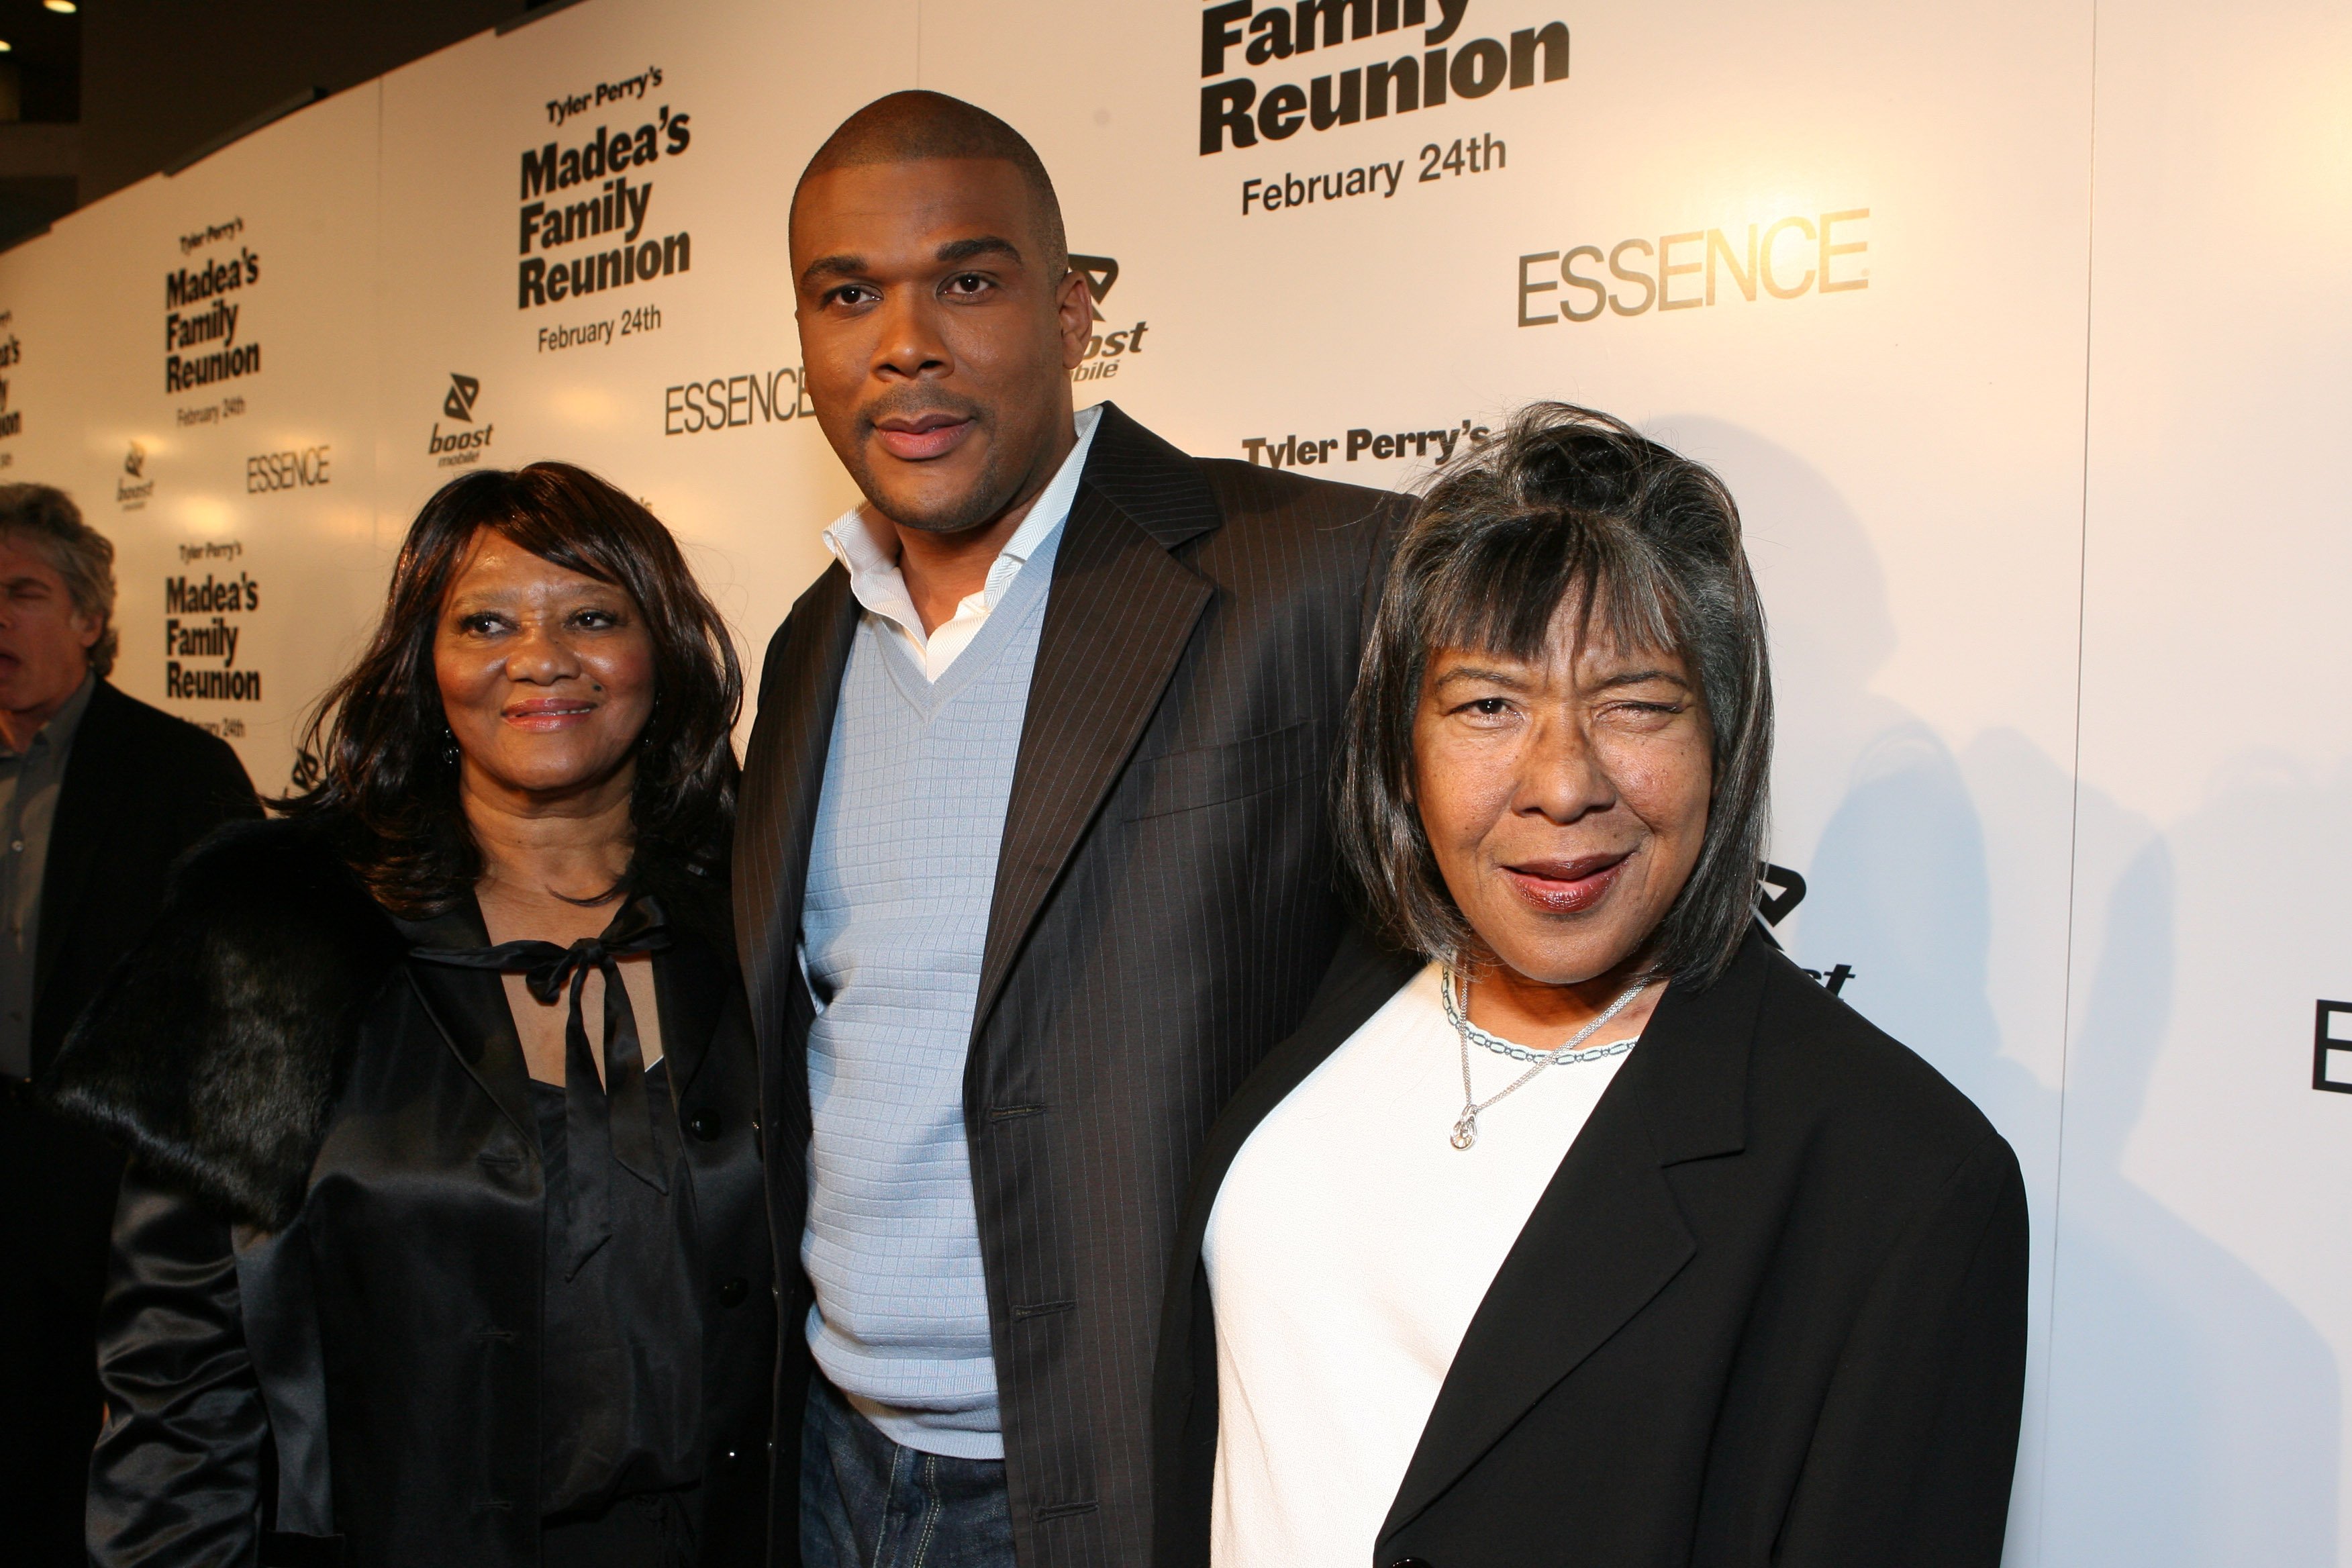 Tyler Perry poses for a photo on the red carpet with Aunt Mayola and Mother Maxine